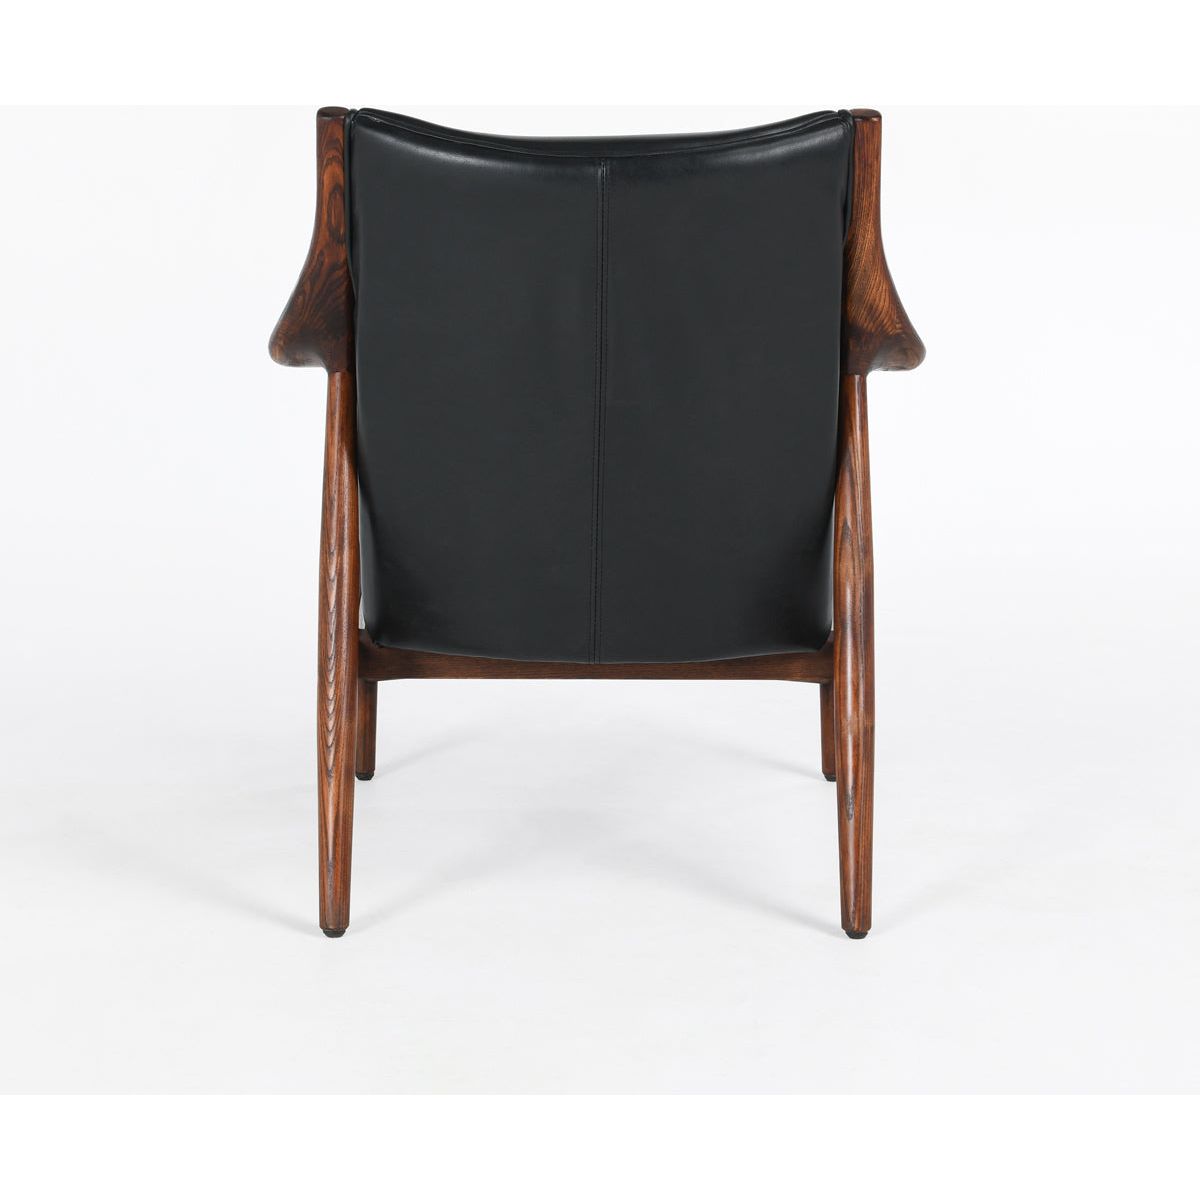 A Benson Mid-Century Leather Accent Chair with a sleek genuine black leather back and seat, framed by rich, dark walnut armrests and legs that show off natural wood grain. The design is contemporary with clean lines and a minimalist aesthetic.